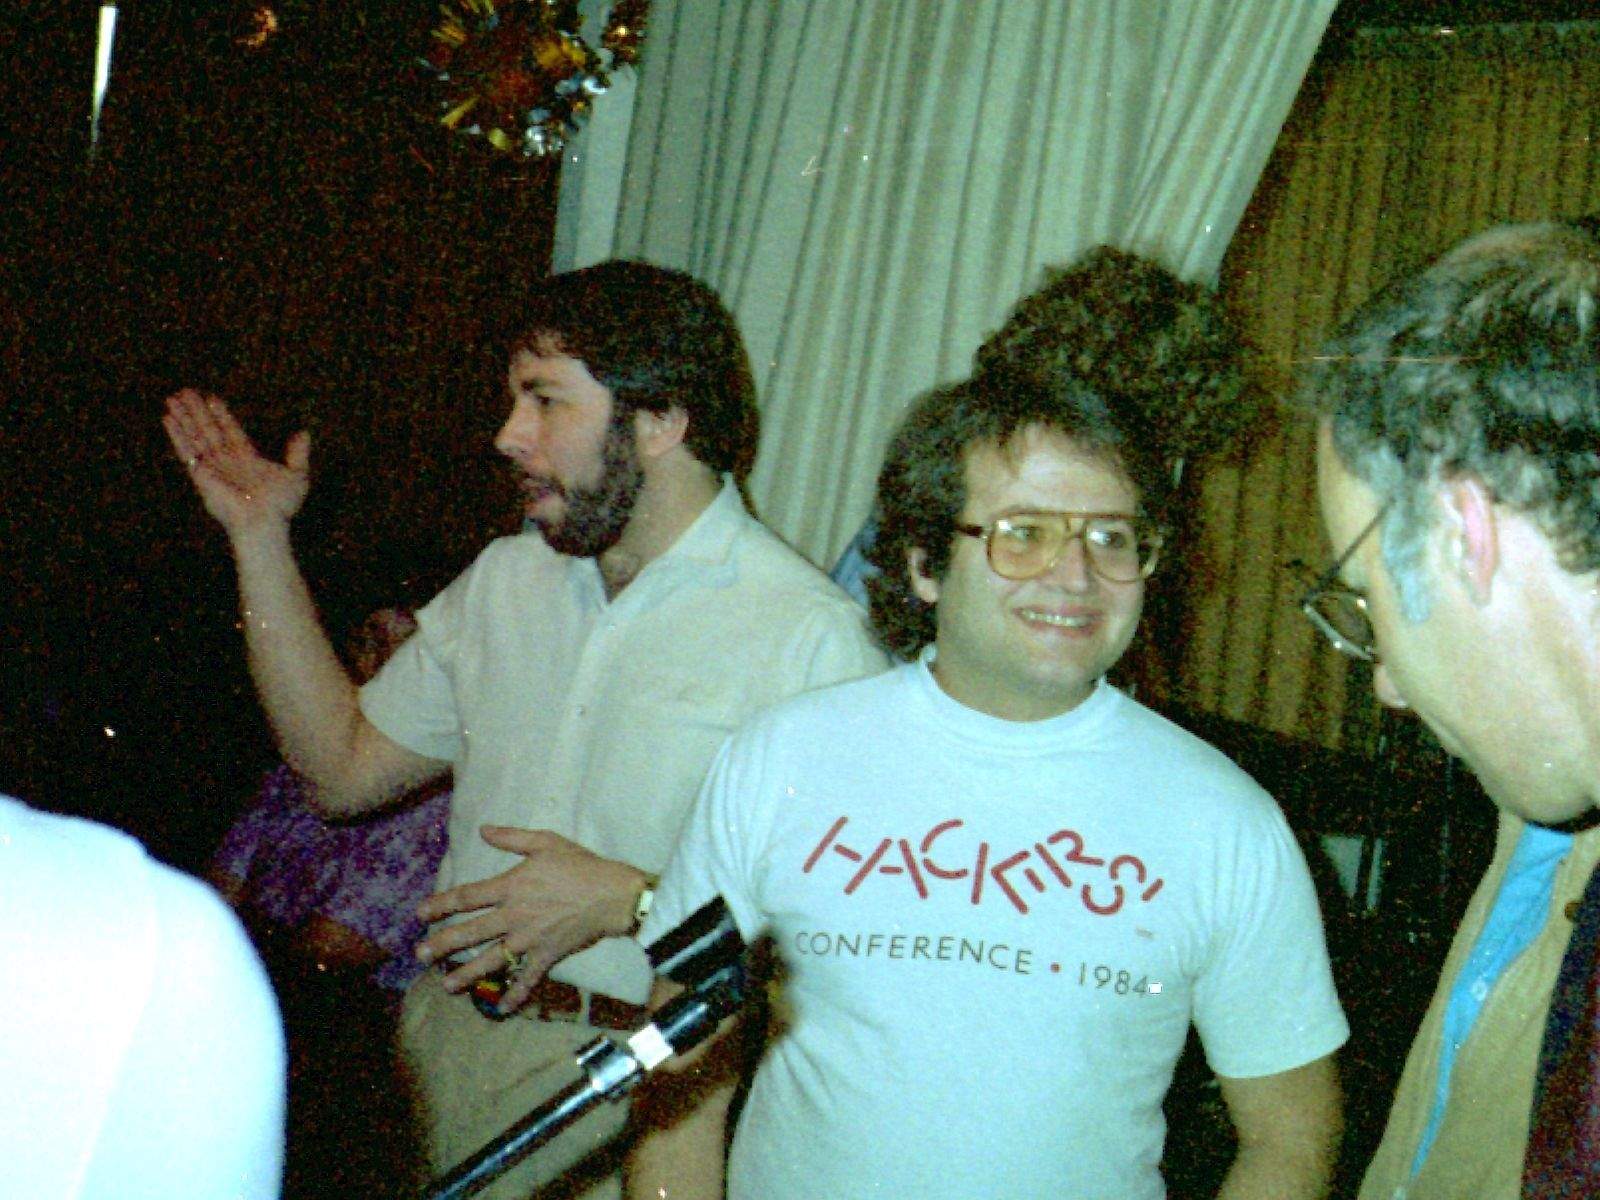 The Woz (left) and Andy Hertzfeld (center) at an original Apple Computer Users Group meeting in the 80s. Photo: Tony Wills